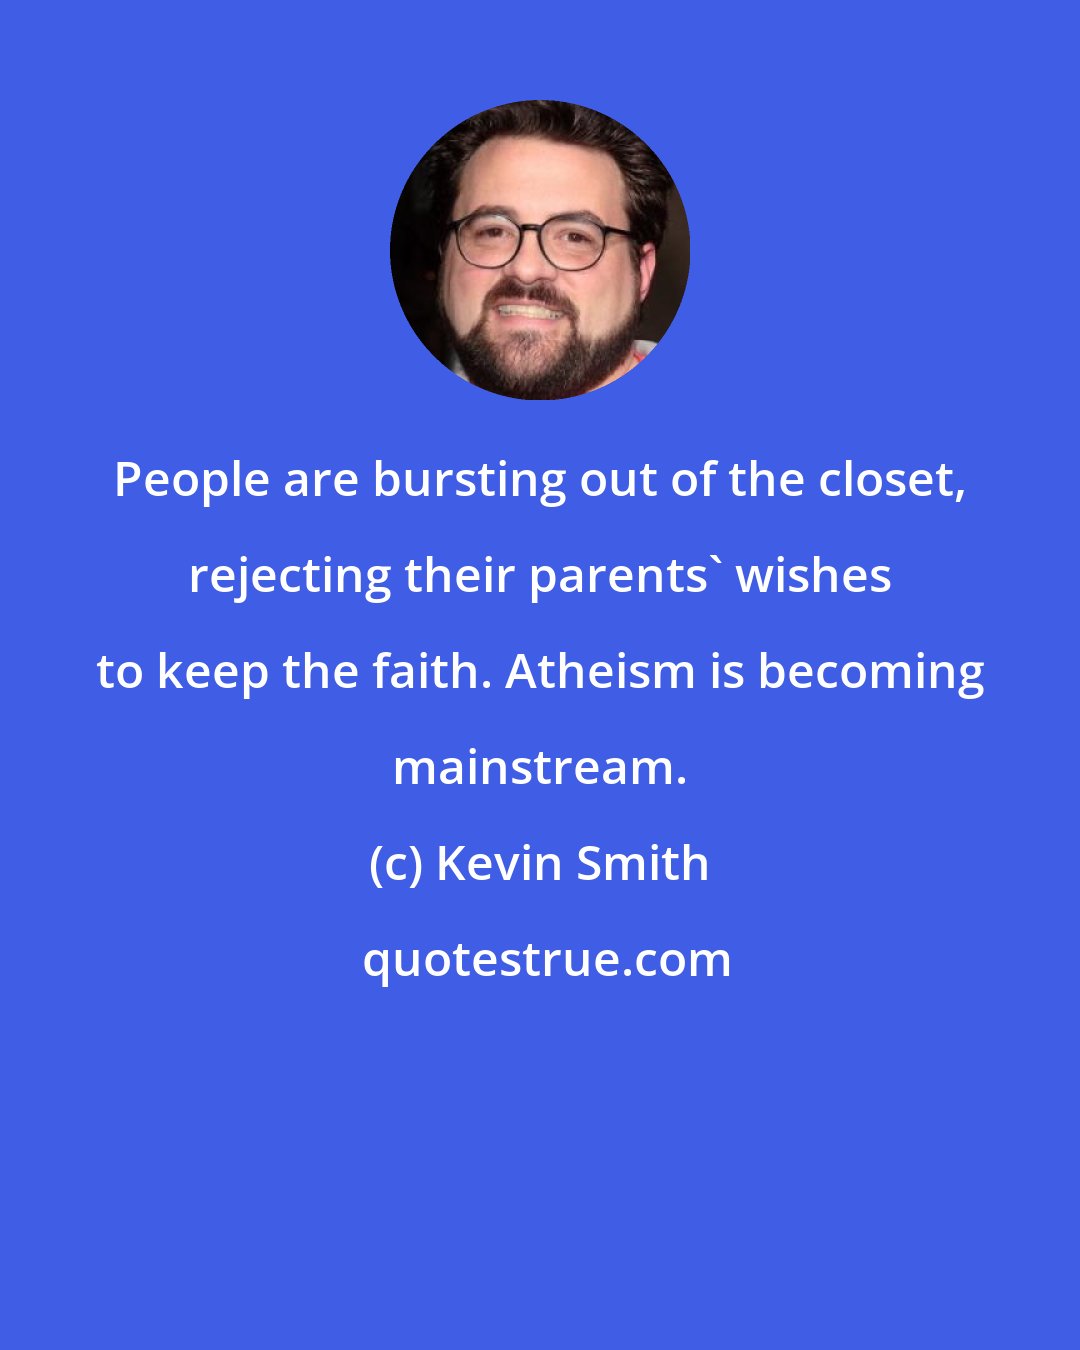 Kevin Smith: People are bursting out of the closet, rejecting their parents' wishes to keep the faith. Atheism is becoming mainstream.